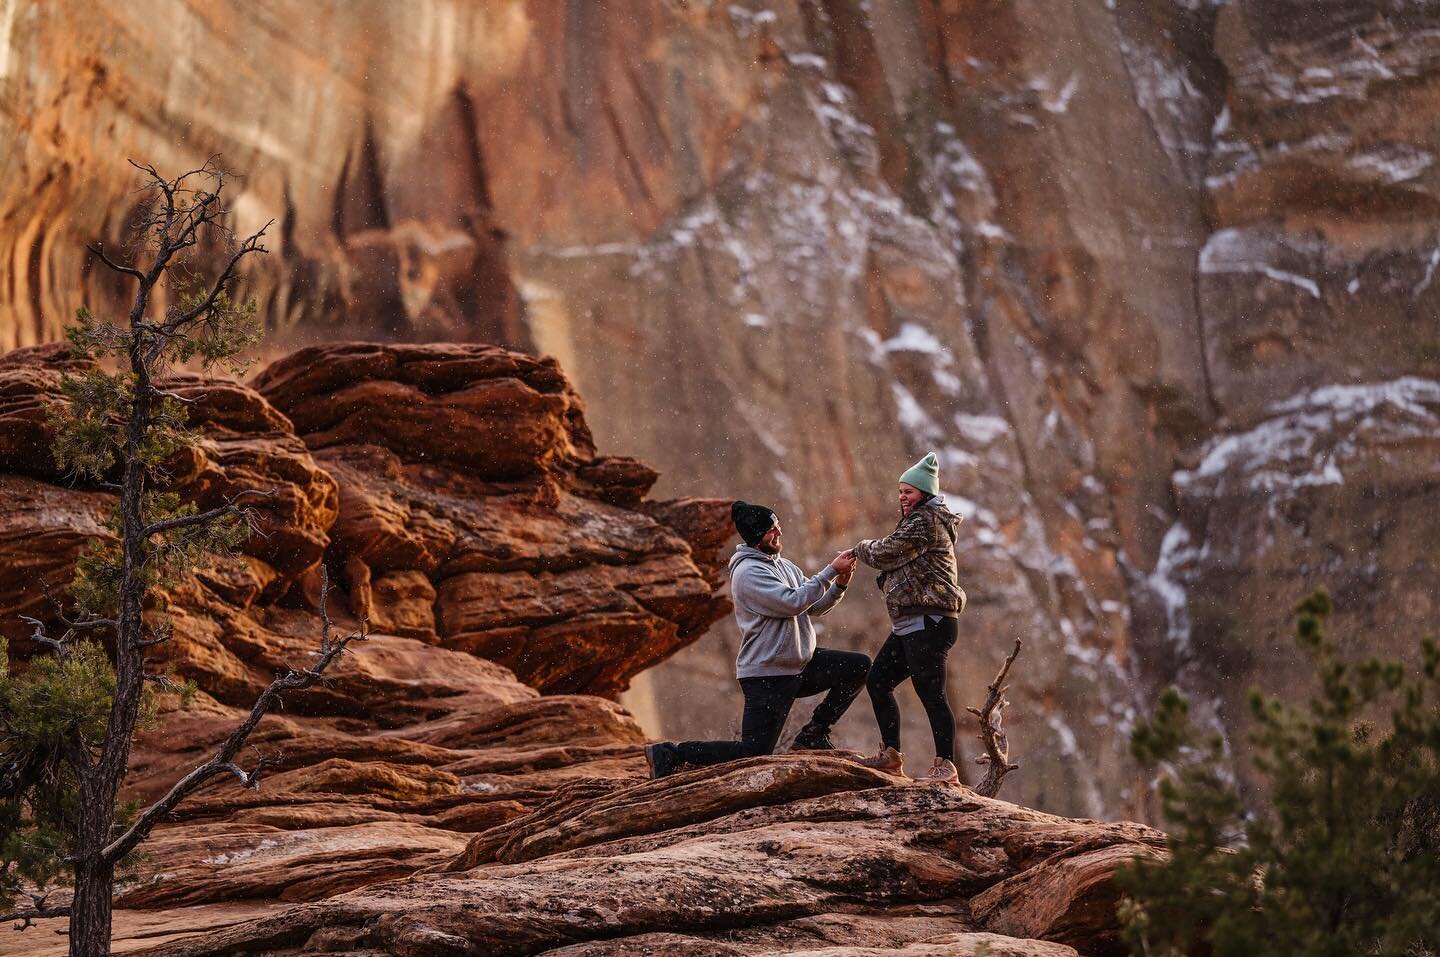 Proposal at the top of Zion‽ Yes Please! When Chris called me a couple weeks ago to see if I&rsquo;d be up for photographing him proposing to Gabby at the edge of the Zion Overlook, I jumped at the chance! They flew from Florida and brought the hint 